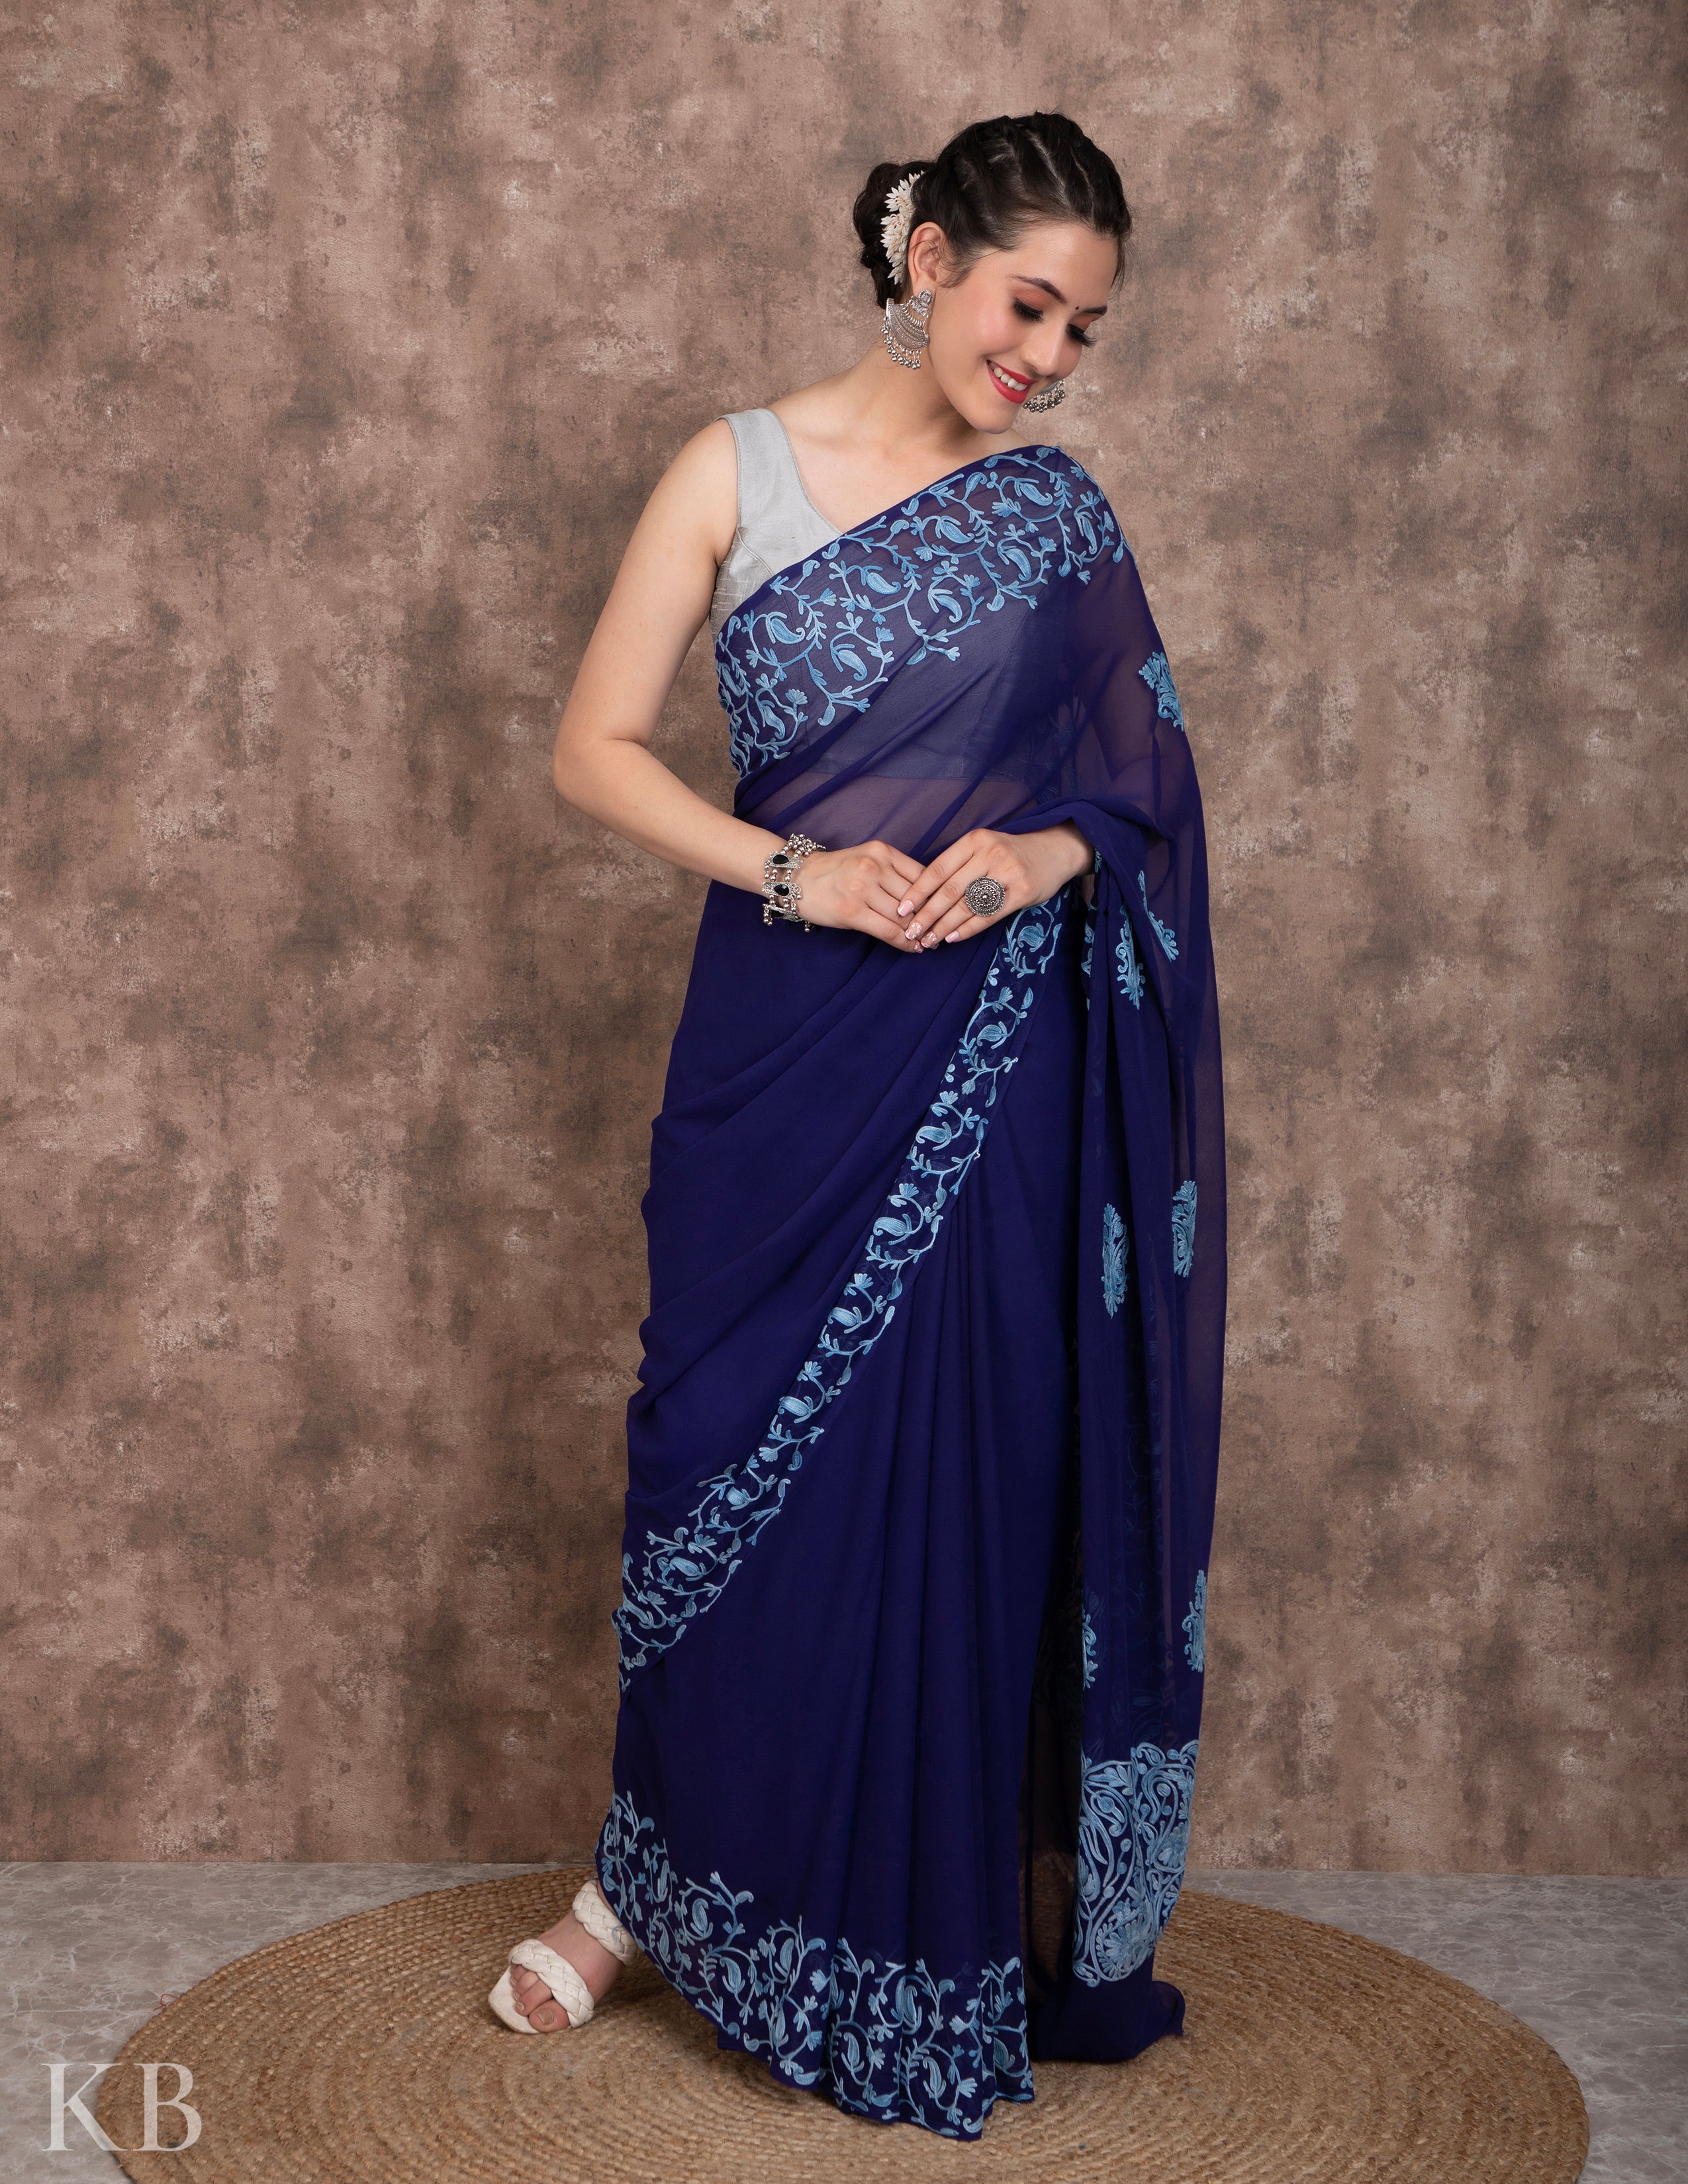 Chiffon Saree in Wine Color With Elegant Floral Work